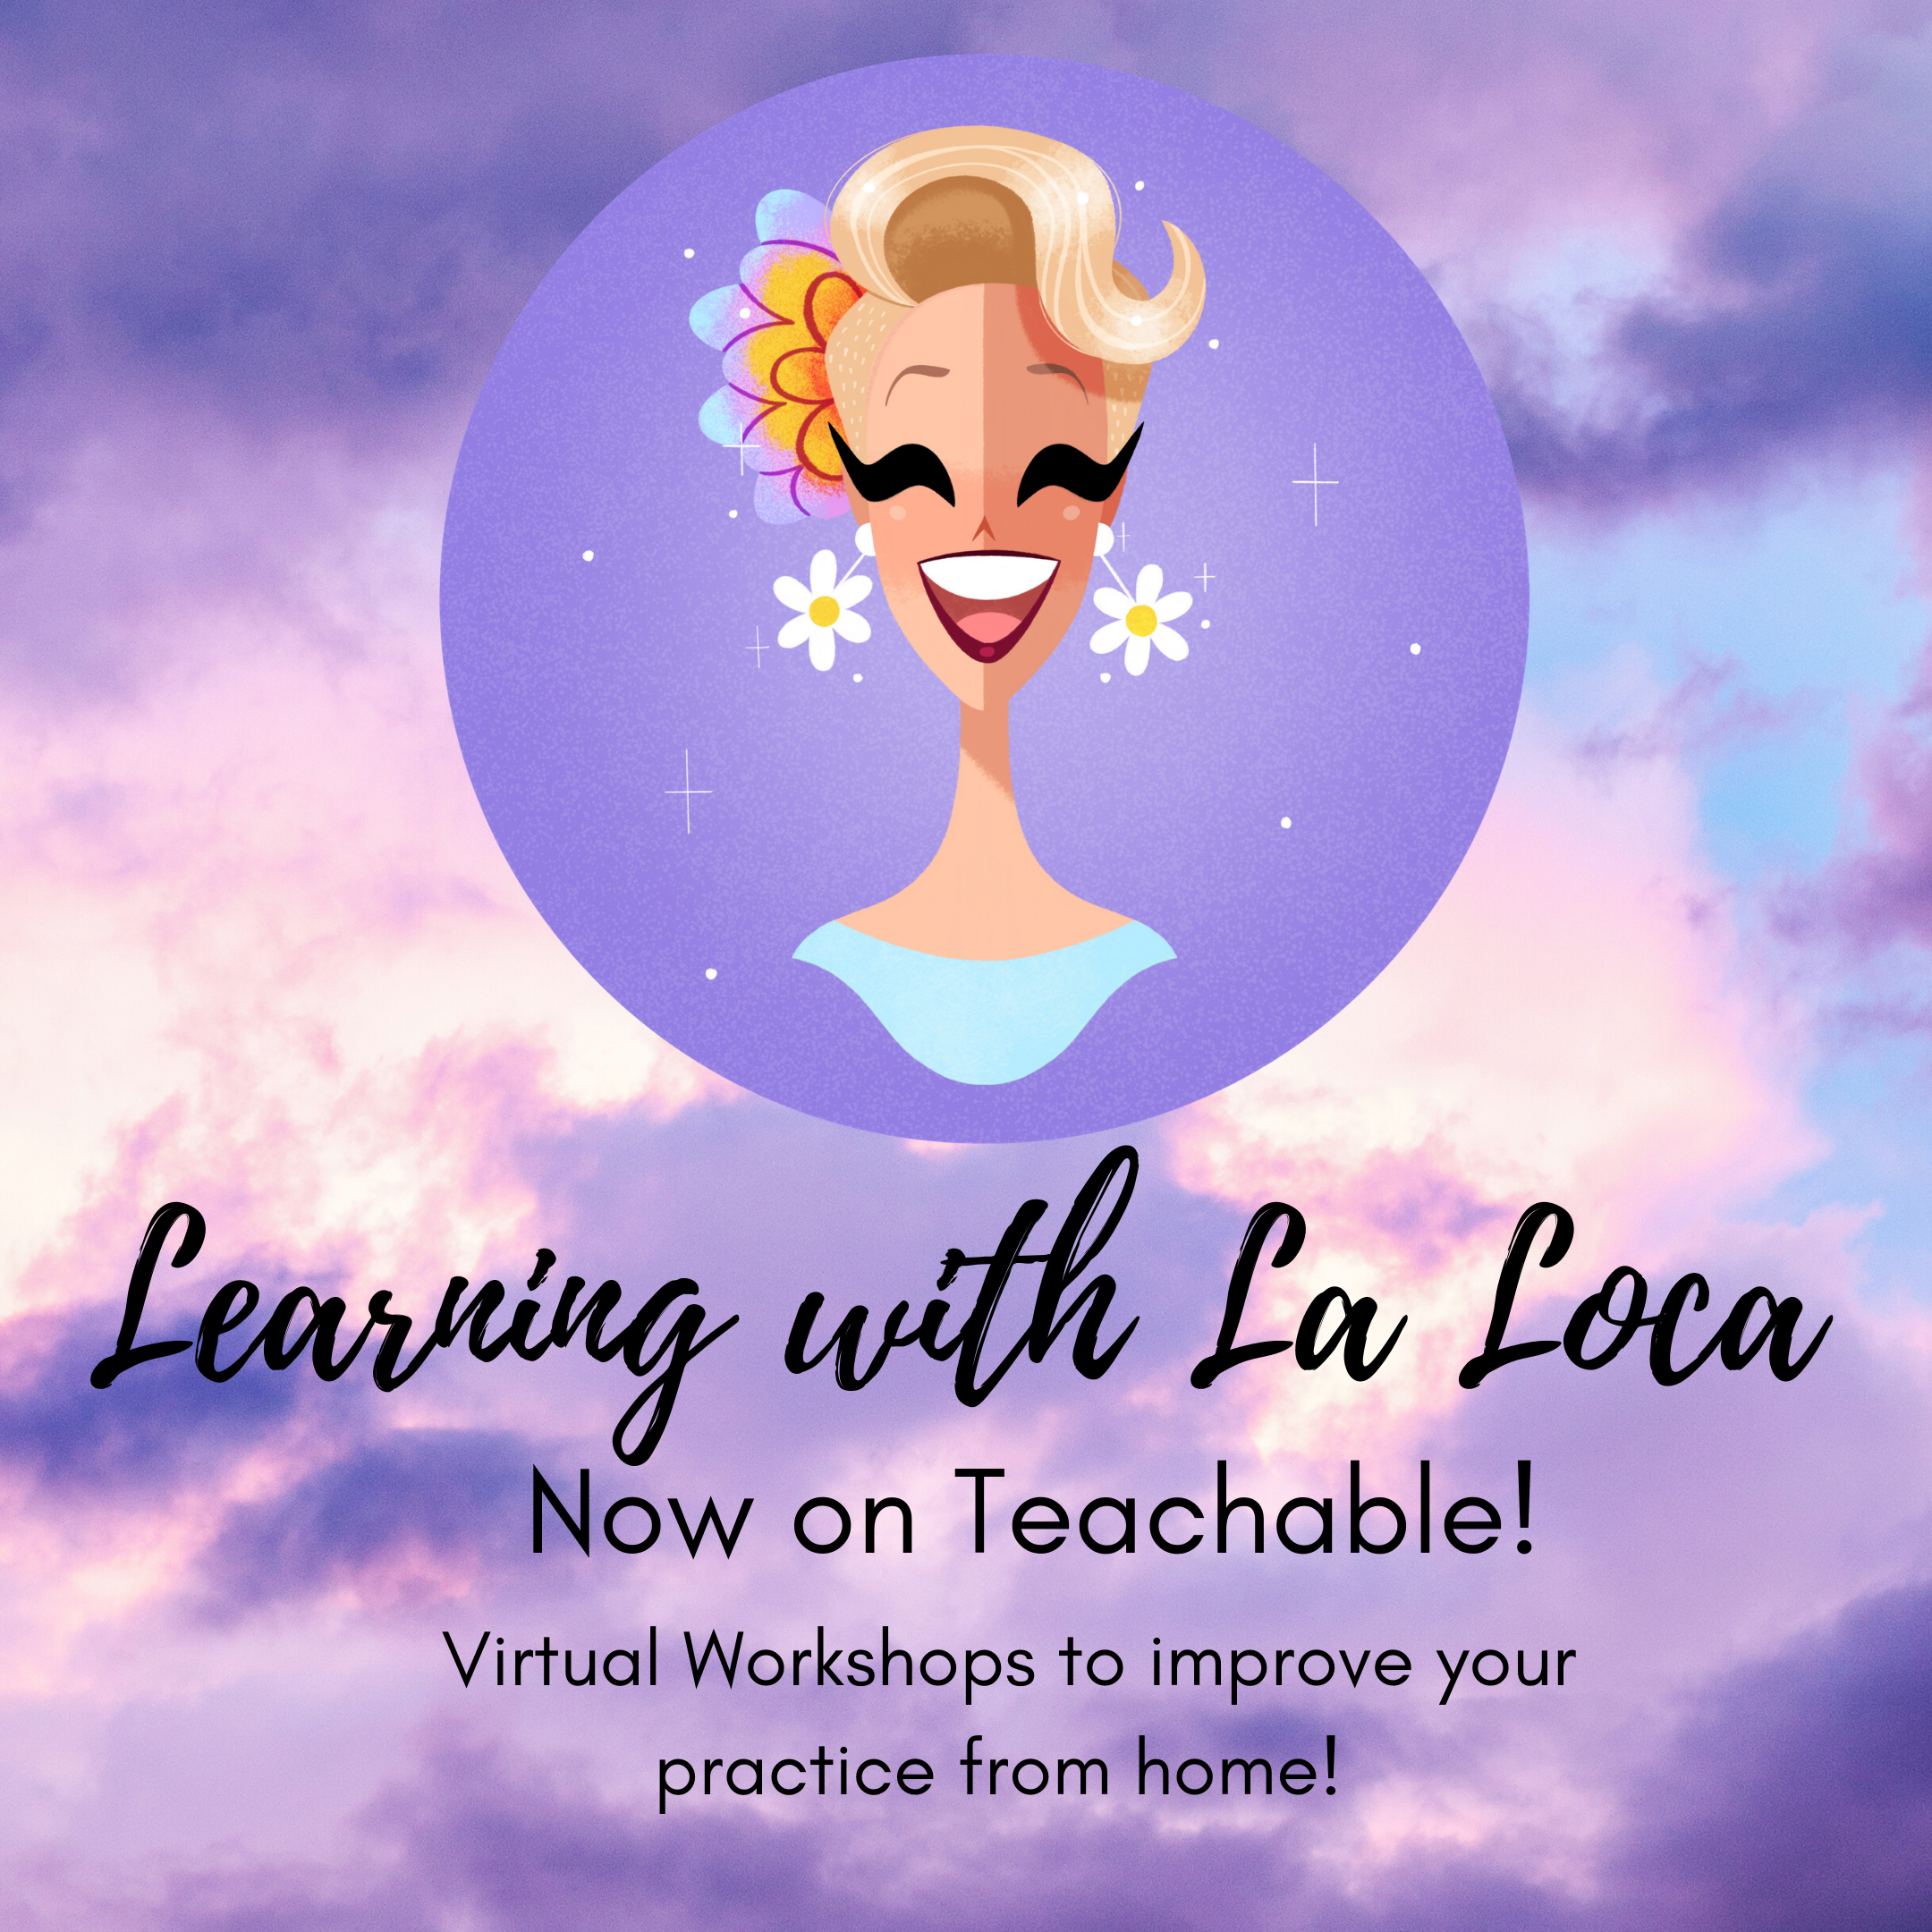 Learn with me (La Loca) TODAY! and at 40% off!!!